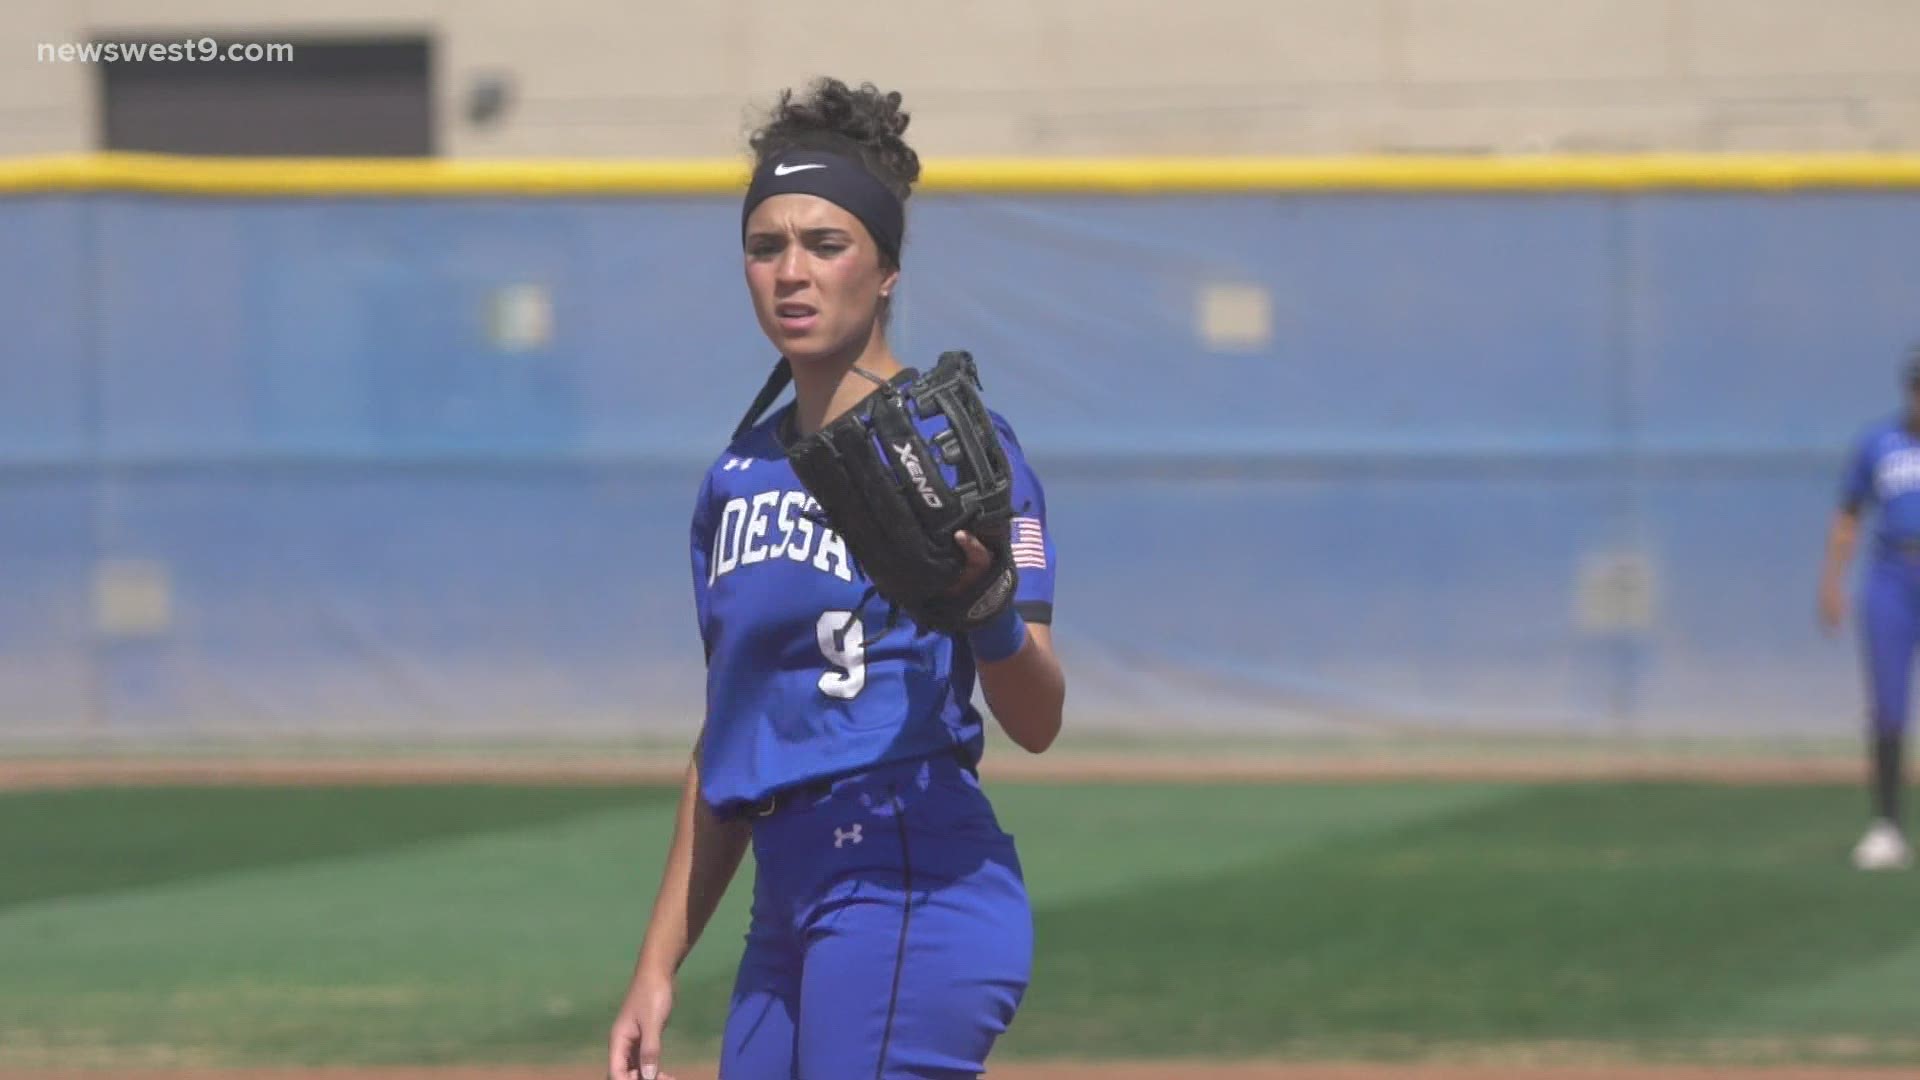 Odessa College was on fire today in their second game of the doubleheader.